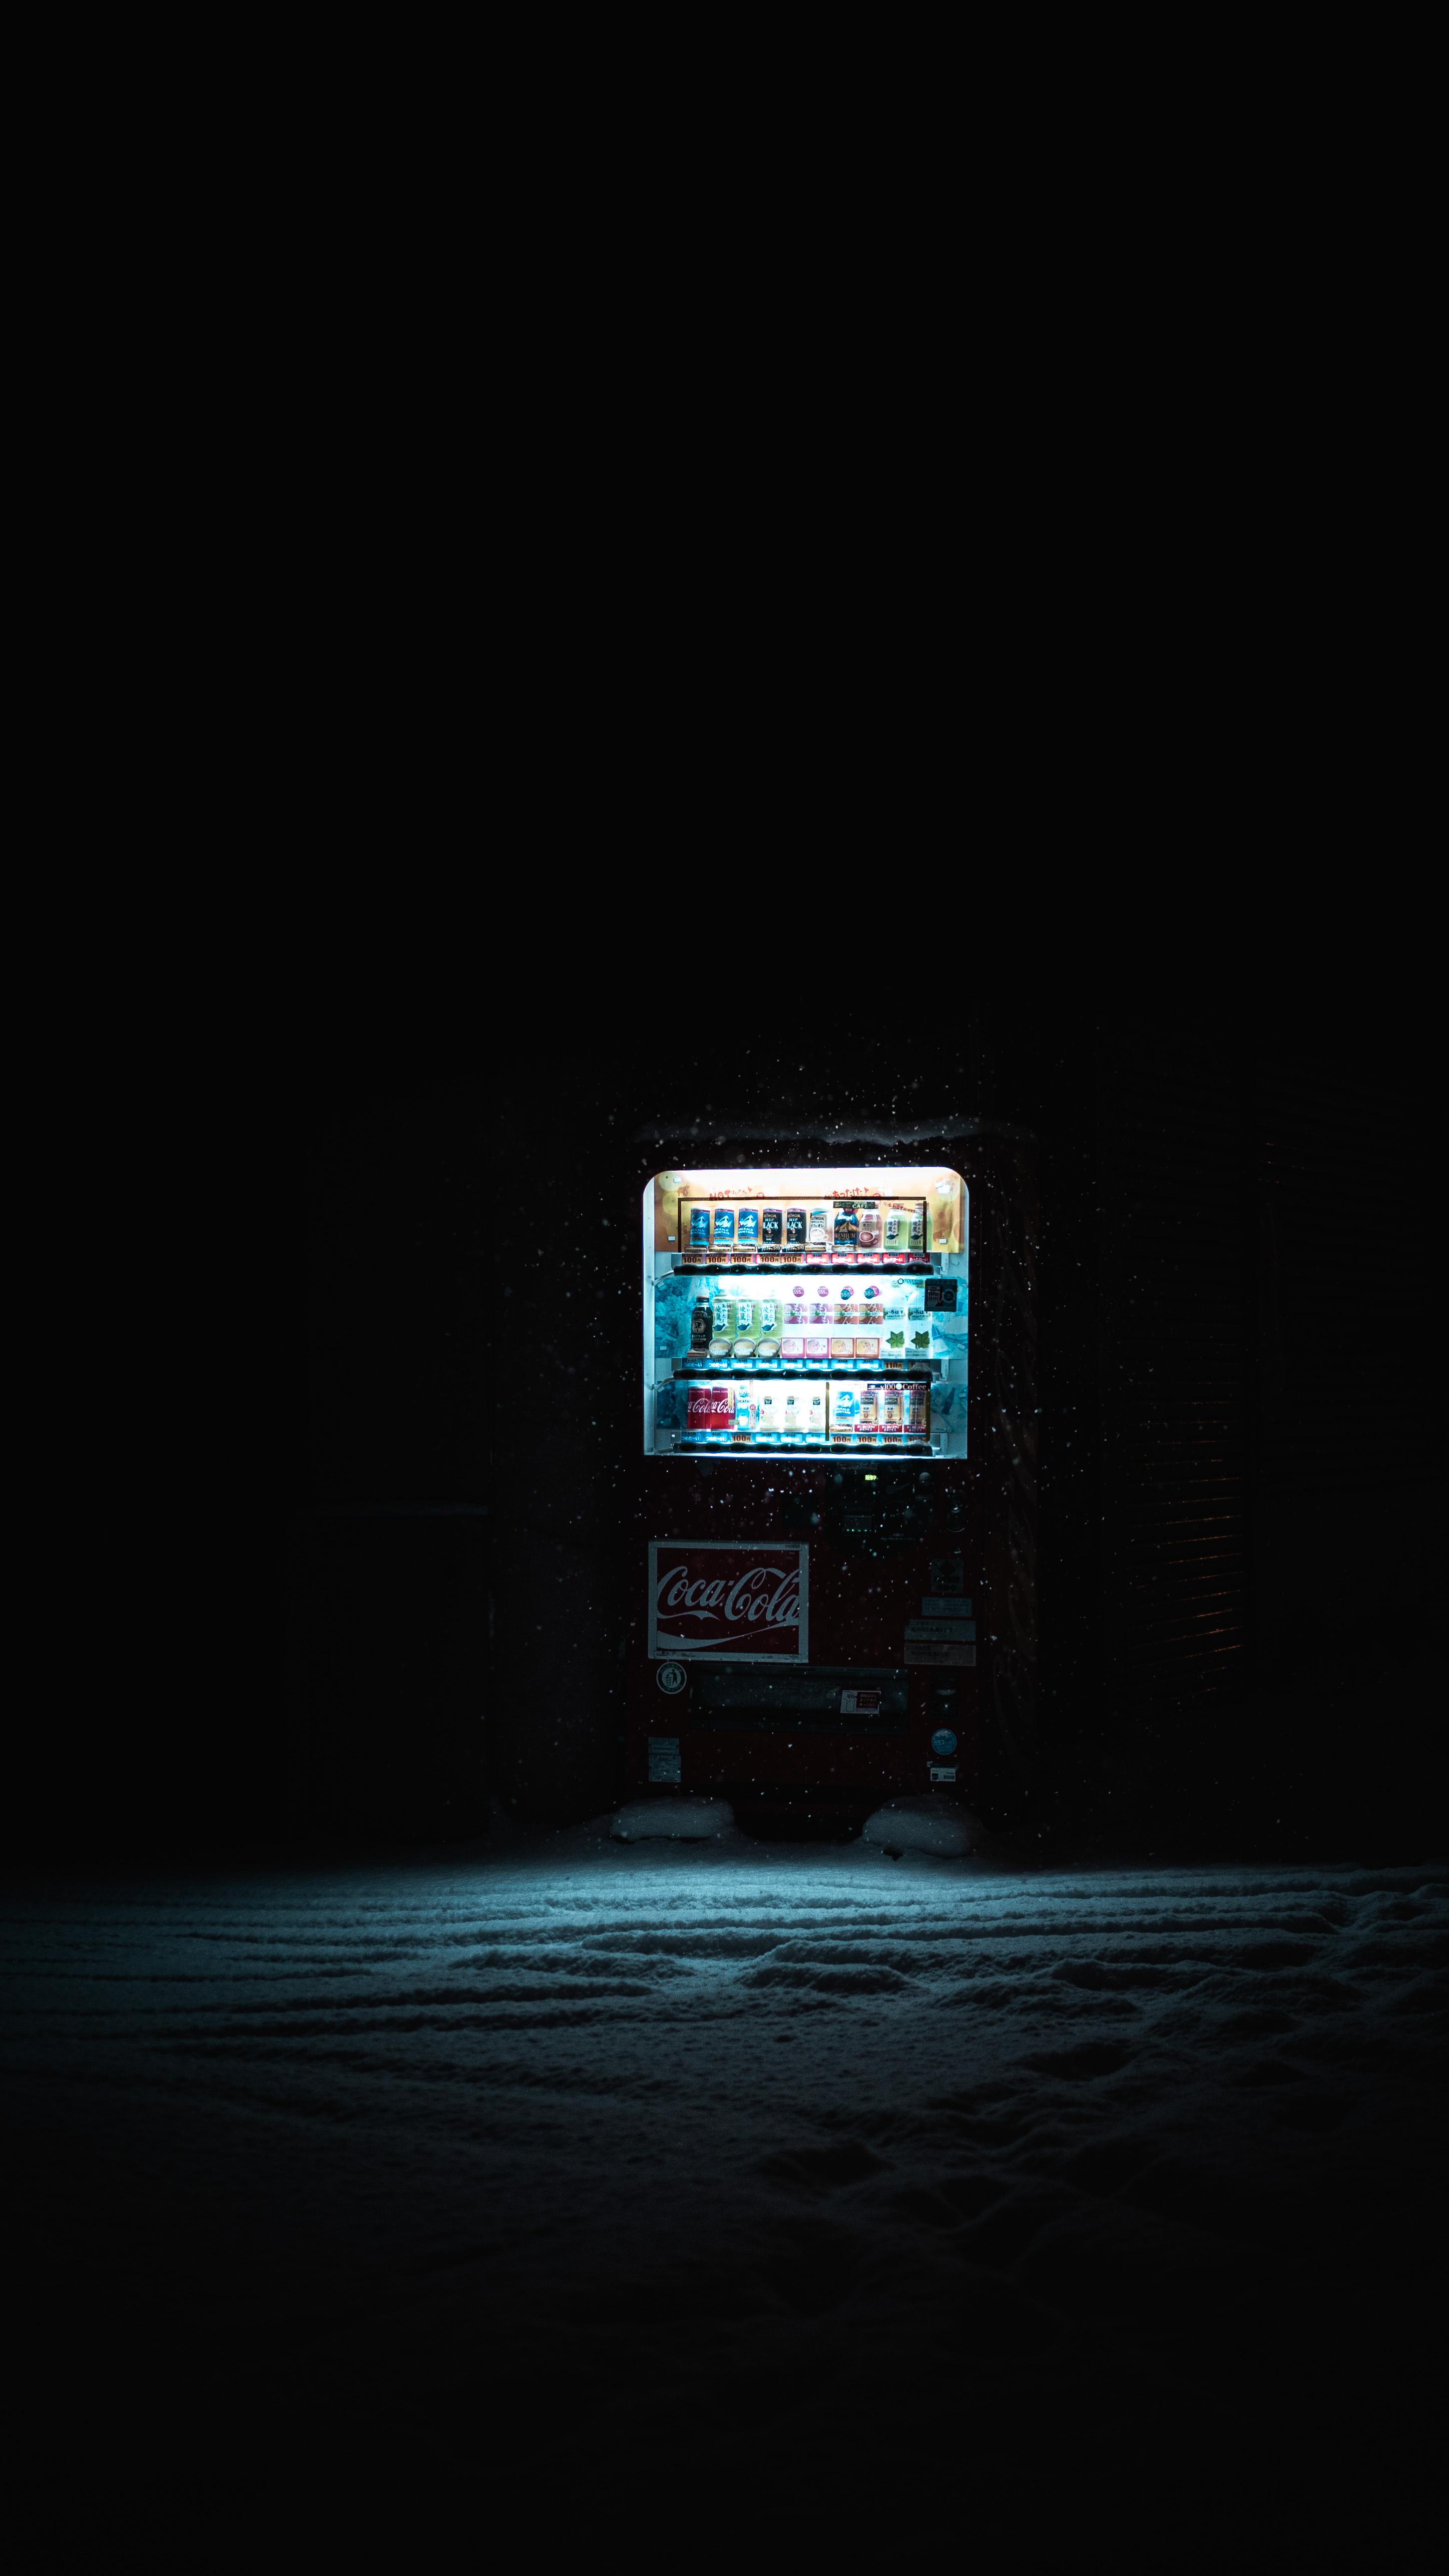 Found this lone vending machine while in Japan pics